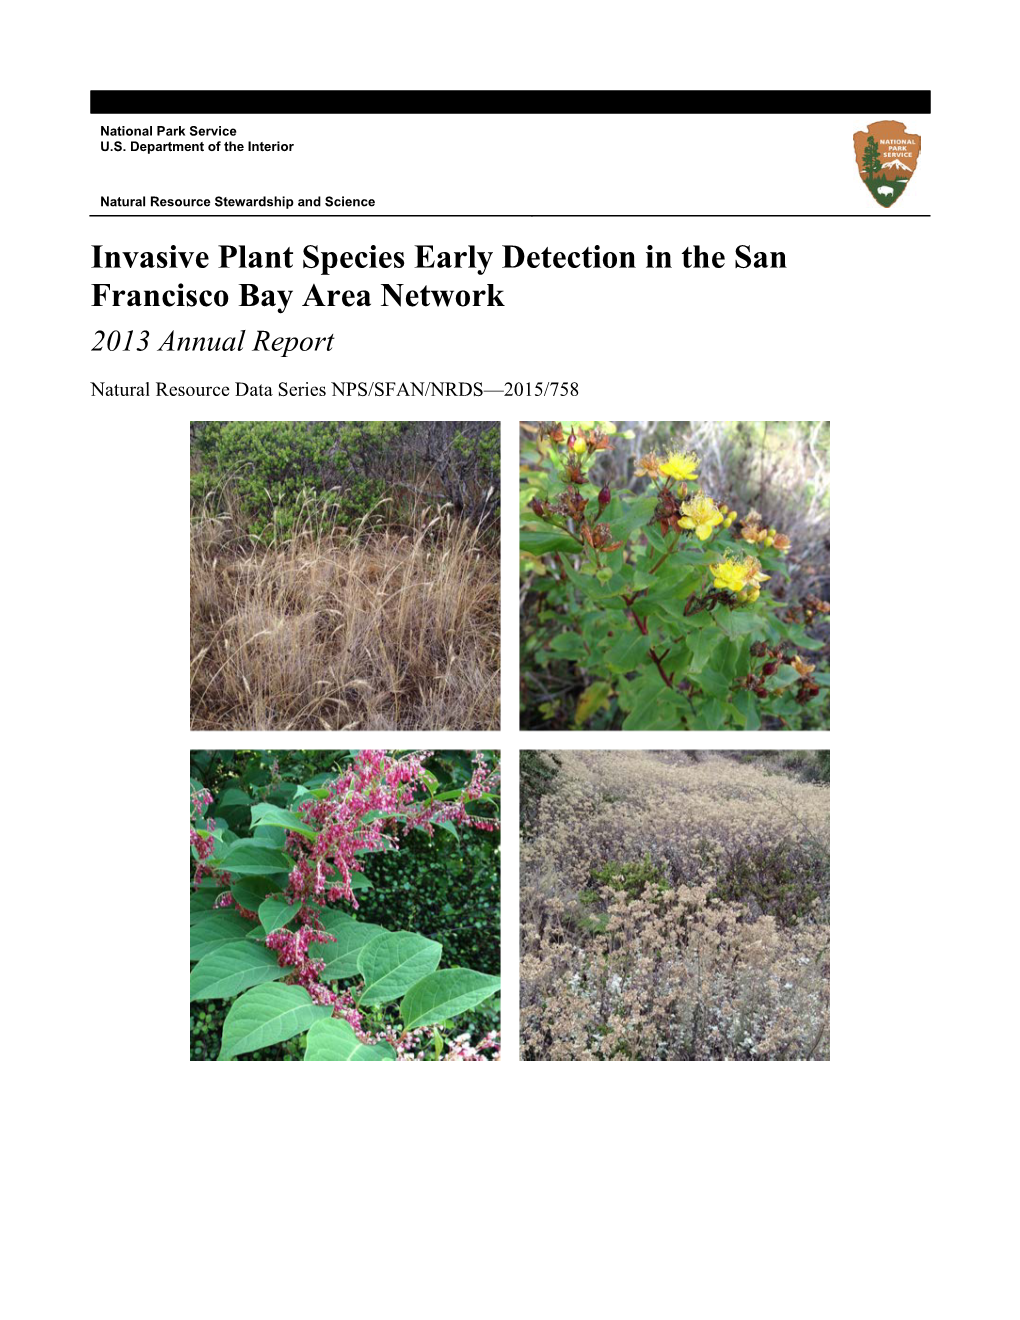 Invasive Plant Species Early Detection in the San Francisco Bay Area Network 2013 Annual Report